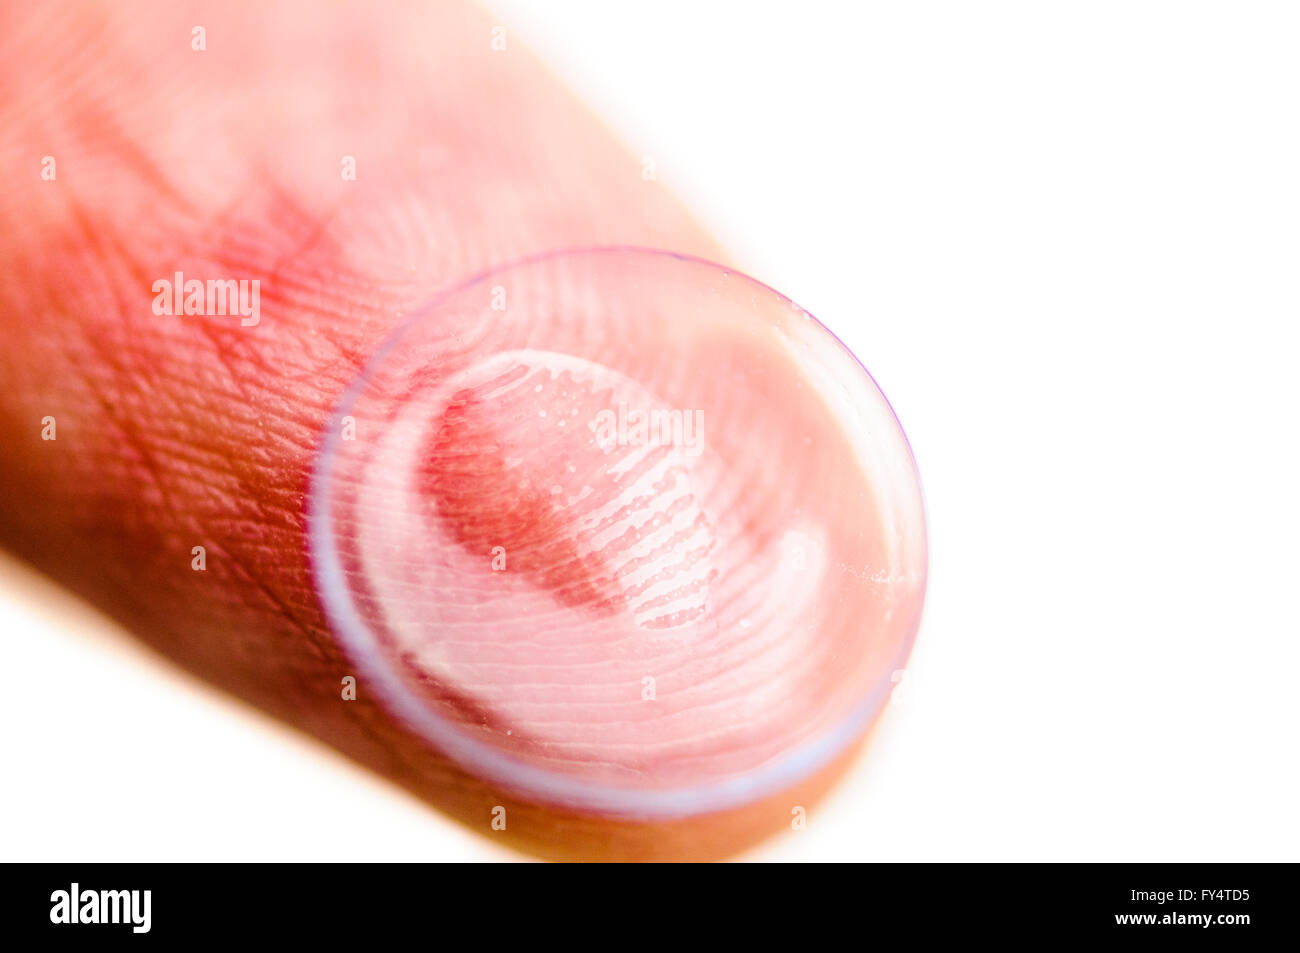 A contact lens on a fingertip ready to be inserted into an eye. Stock Photo